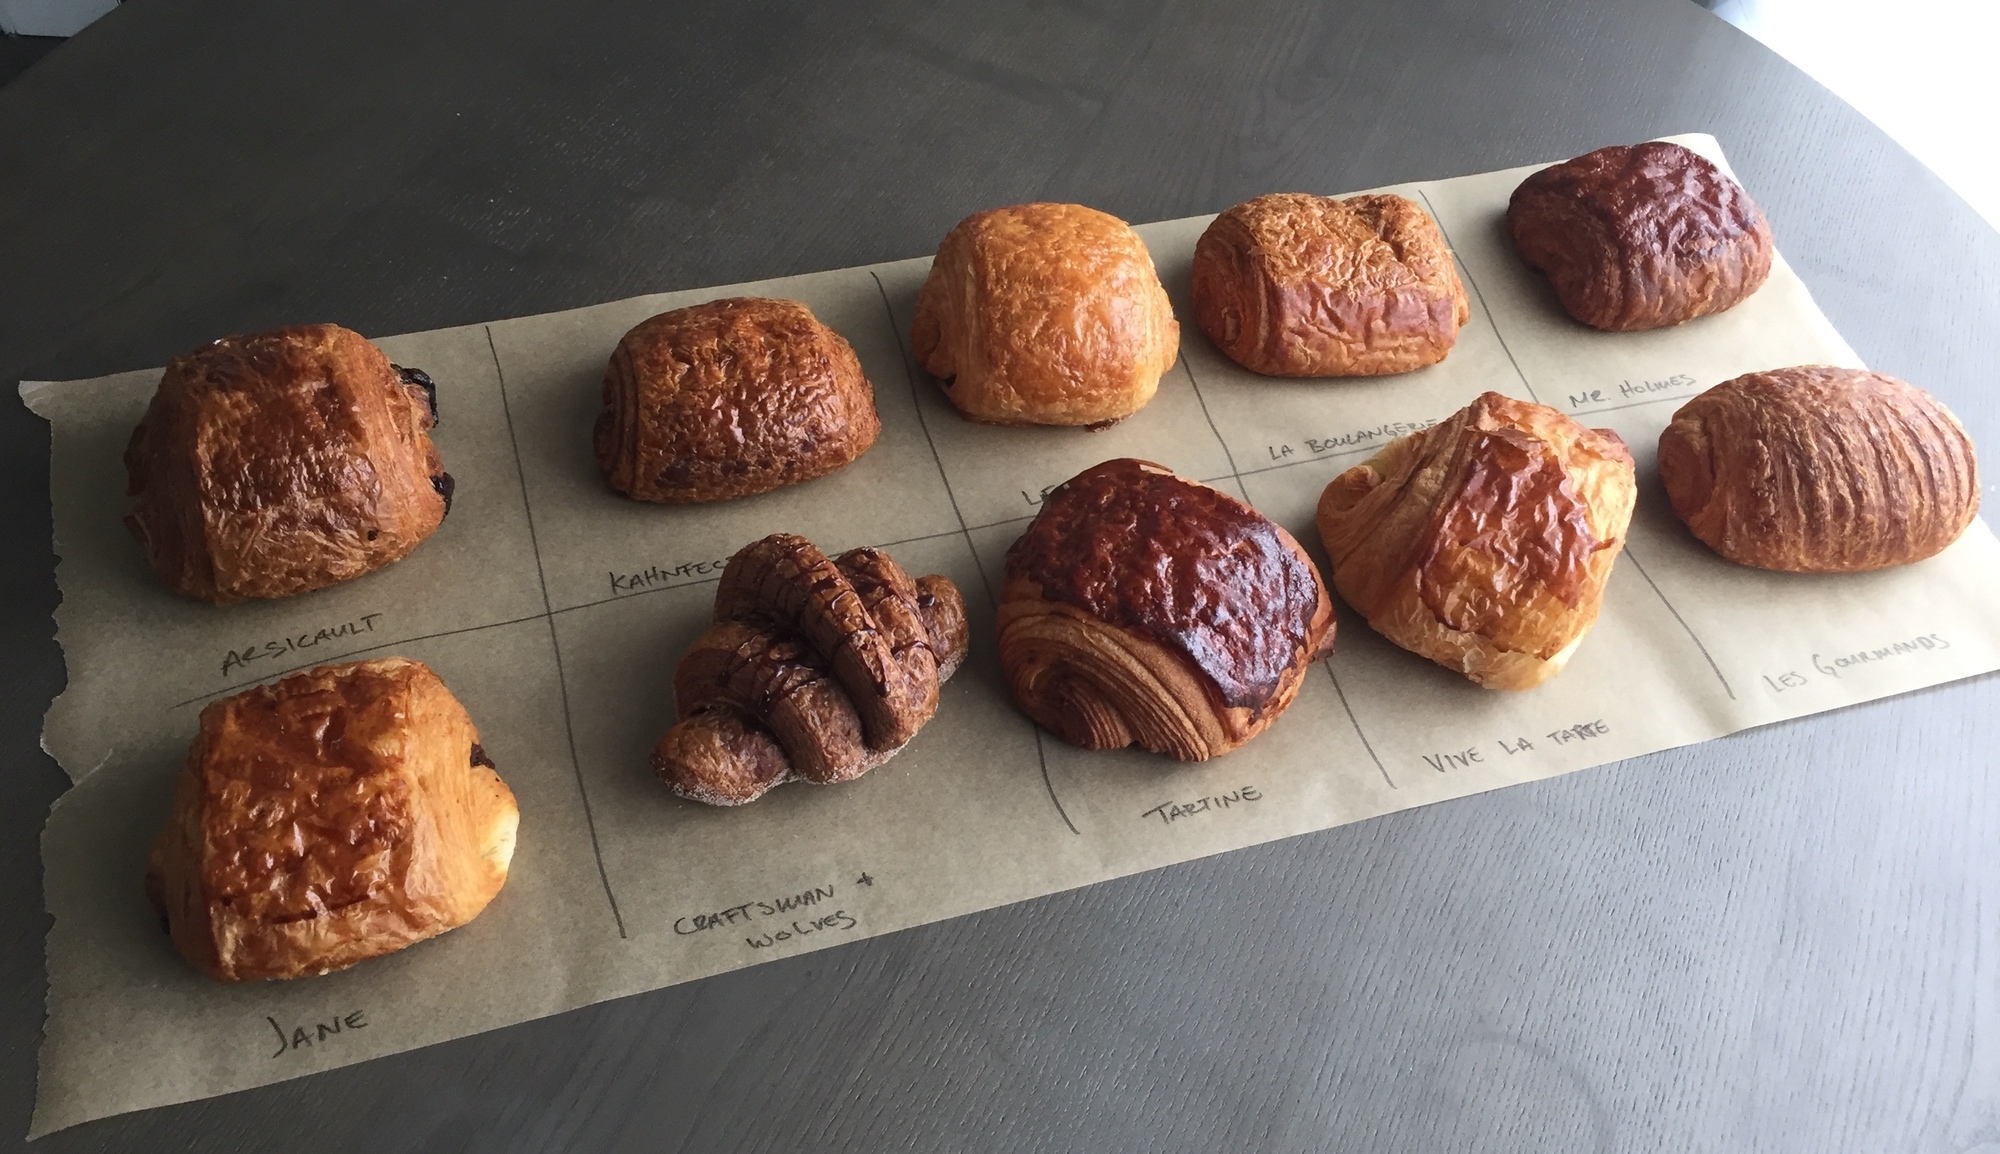 The ten croissants we tasted for episode 14, Two Whole Croissants